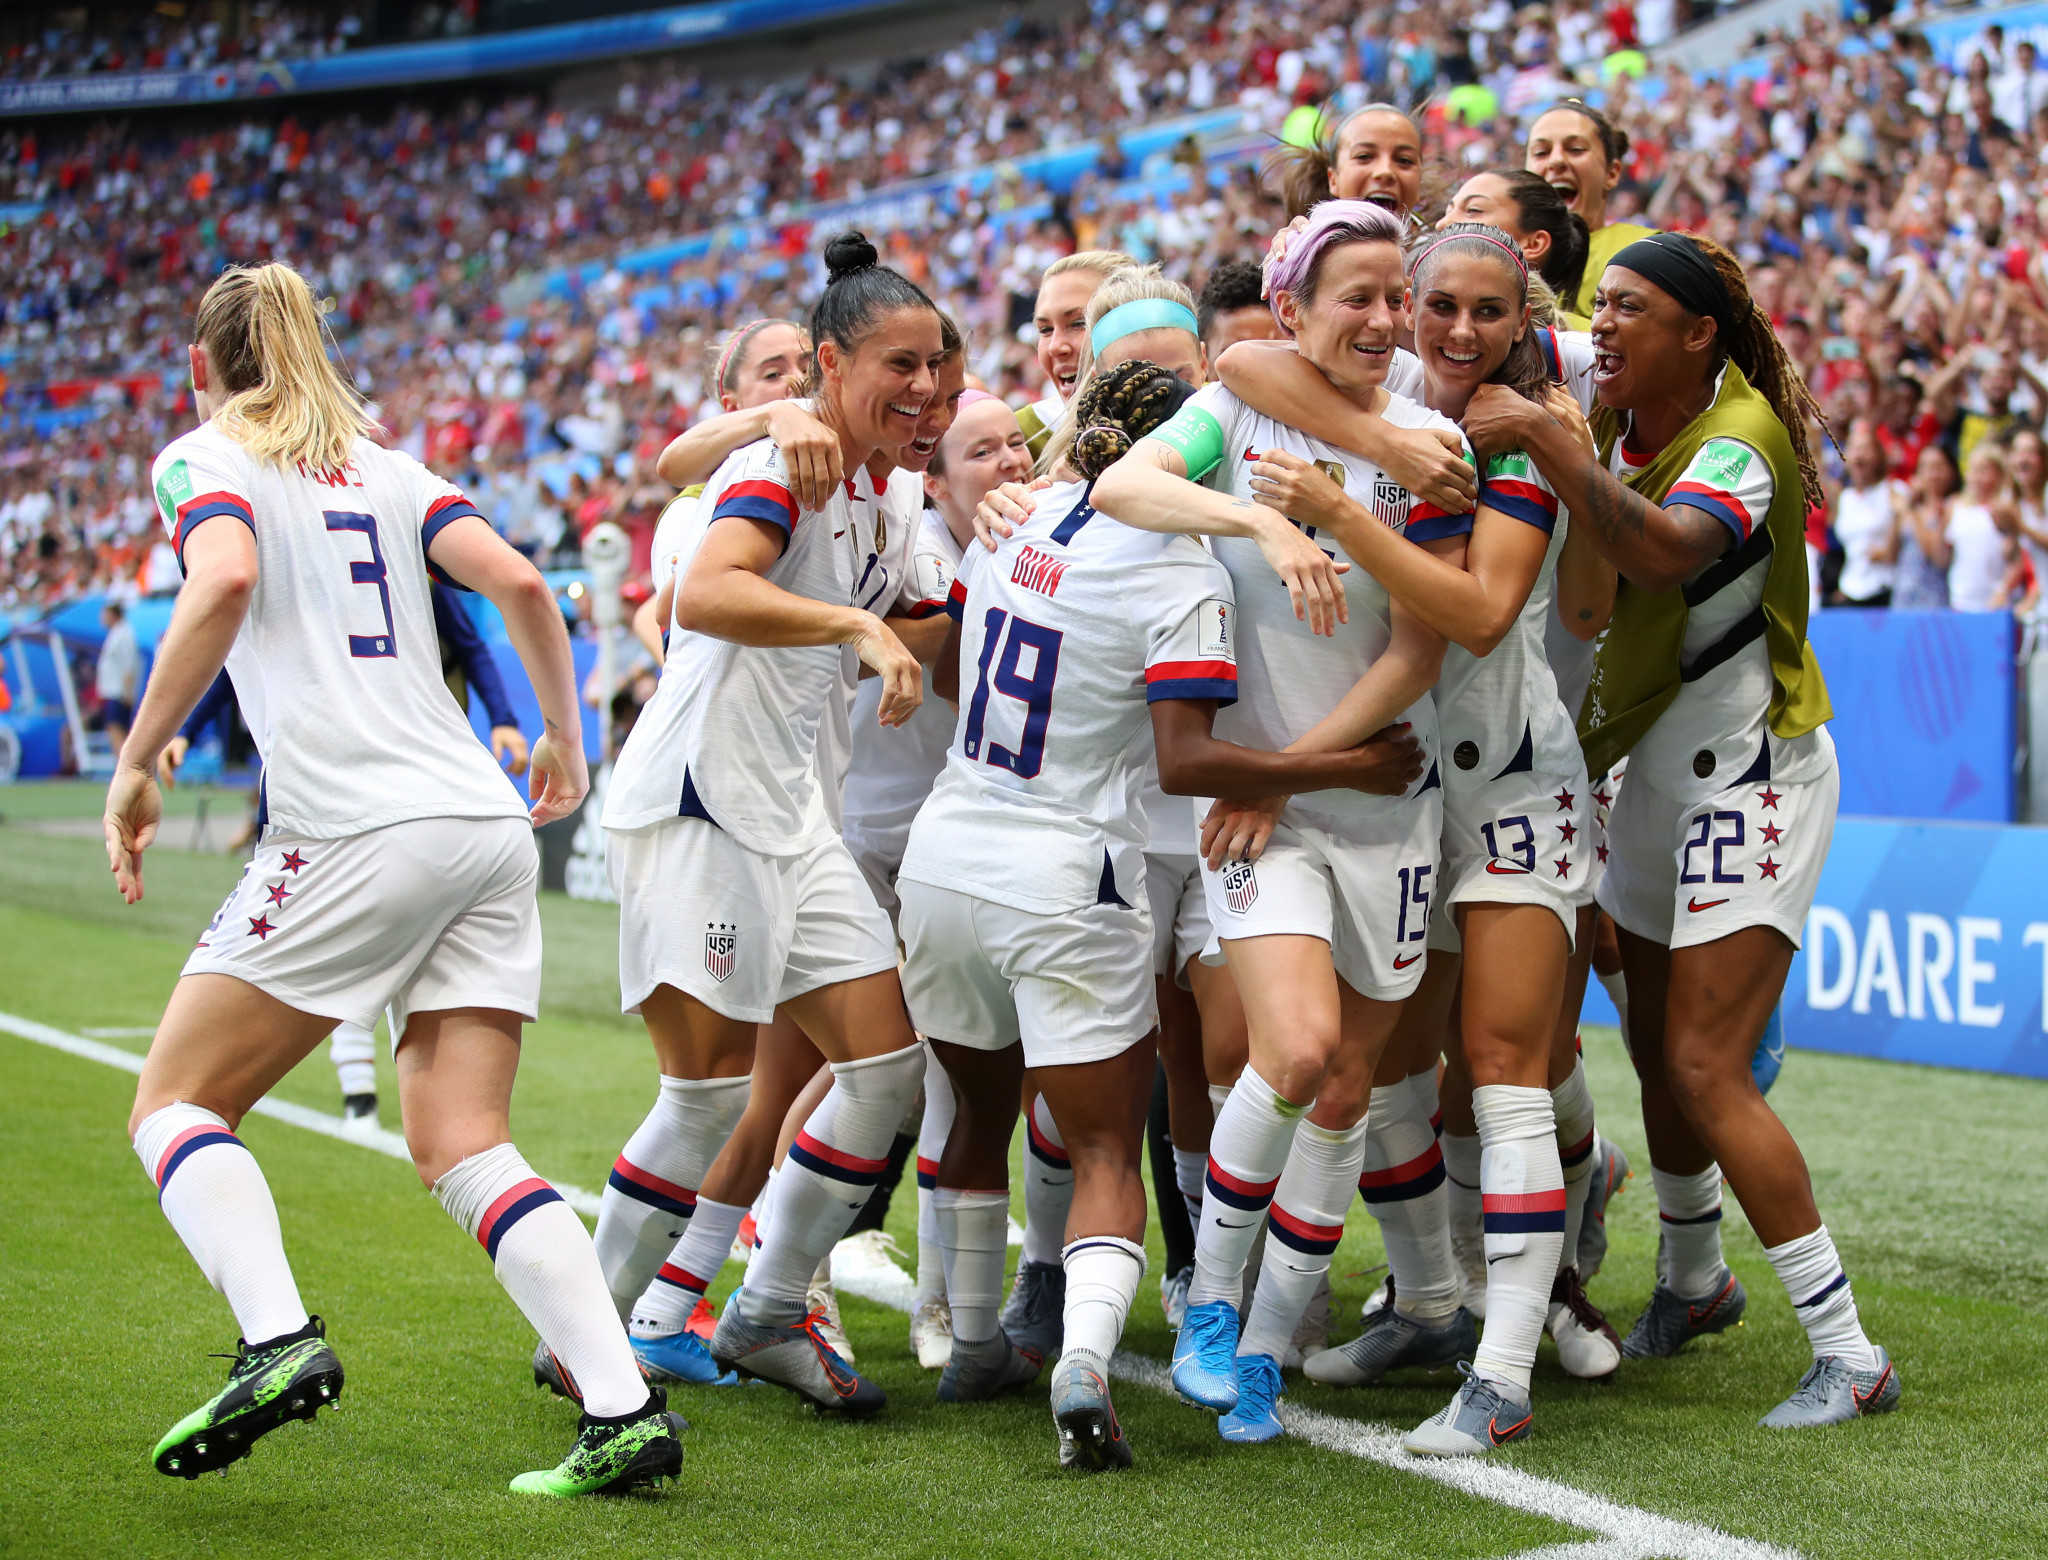 America are the current women's world champions after winning the 2019 World Cup in France ©Getty Images